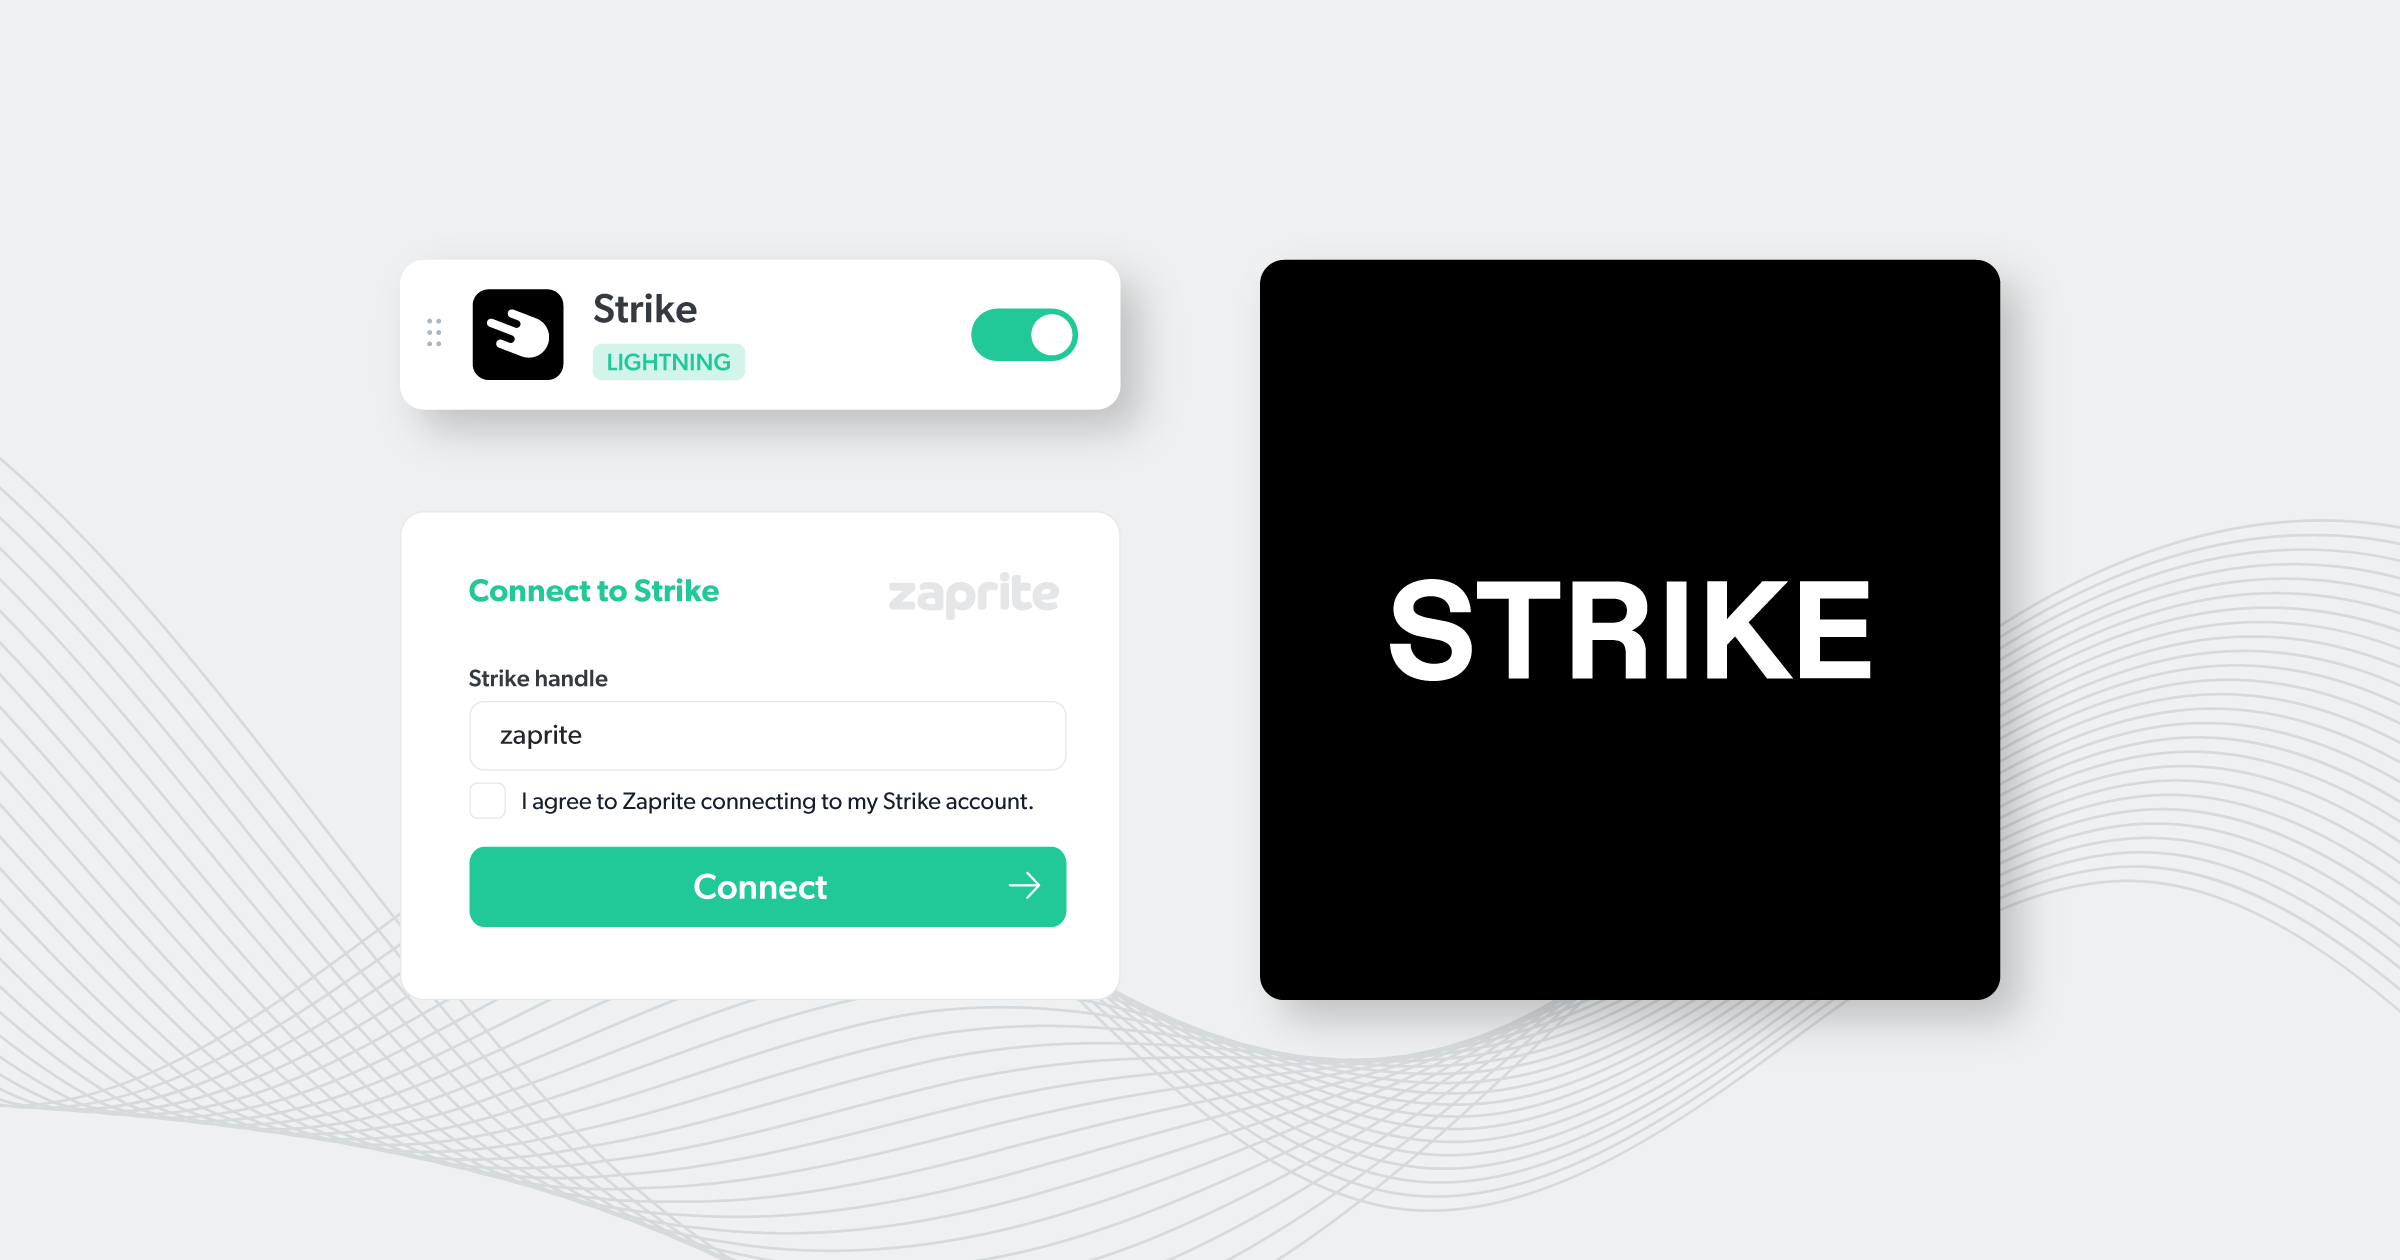 How To Connect Your Strike Account